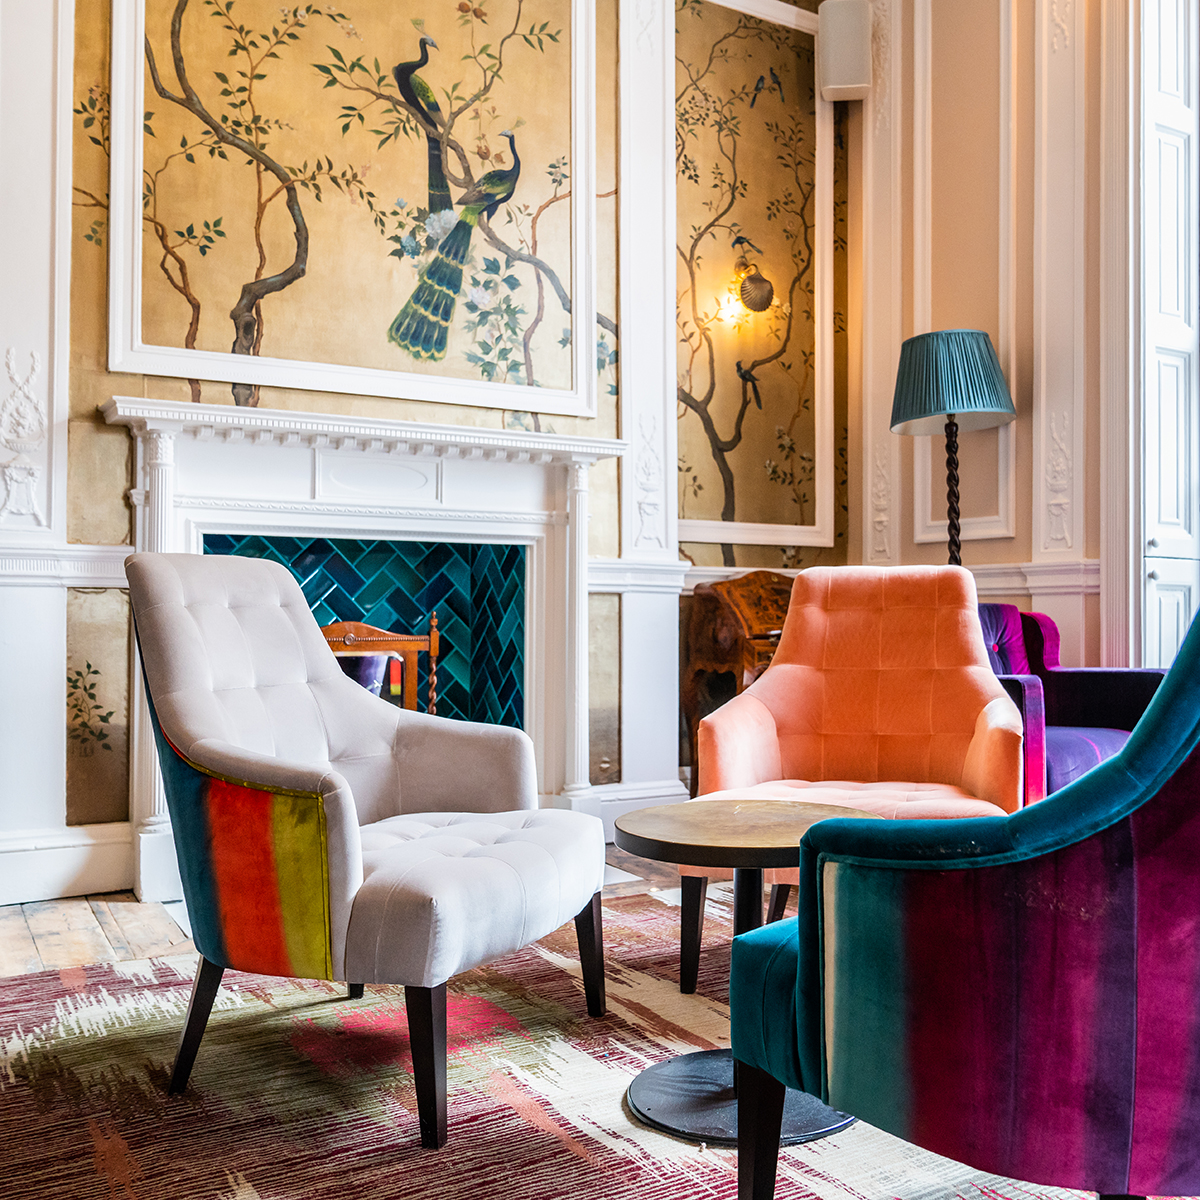 Colourful interiors of a living room with velvet arm chairs and illustrated walls